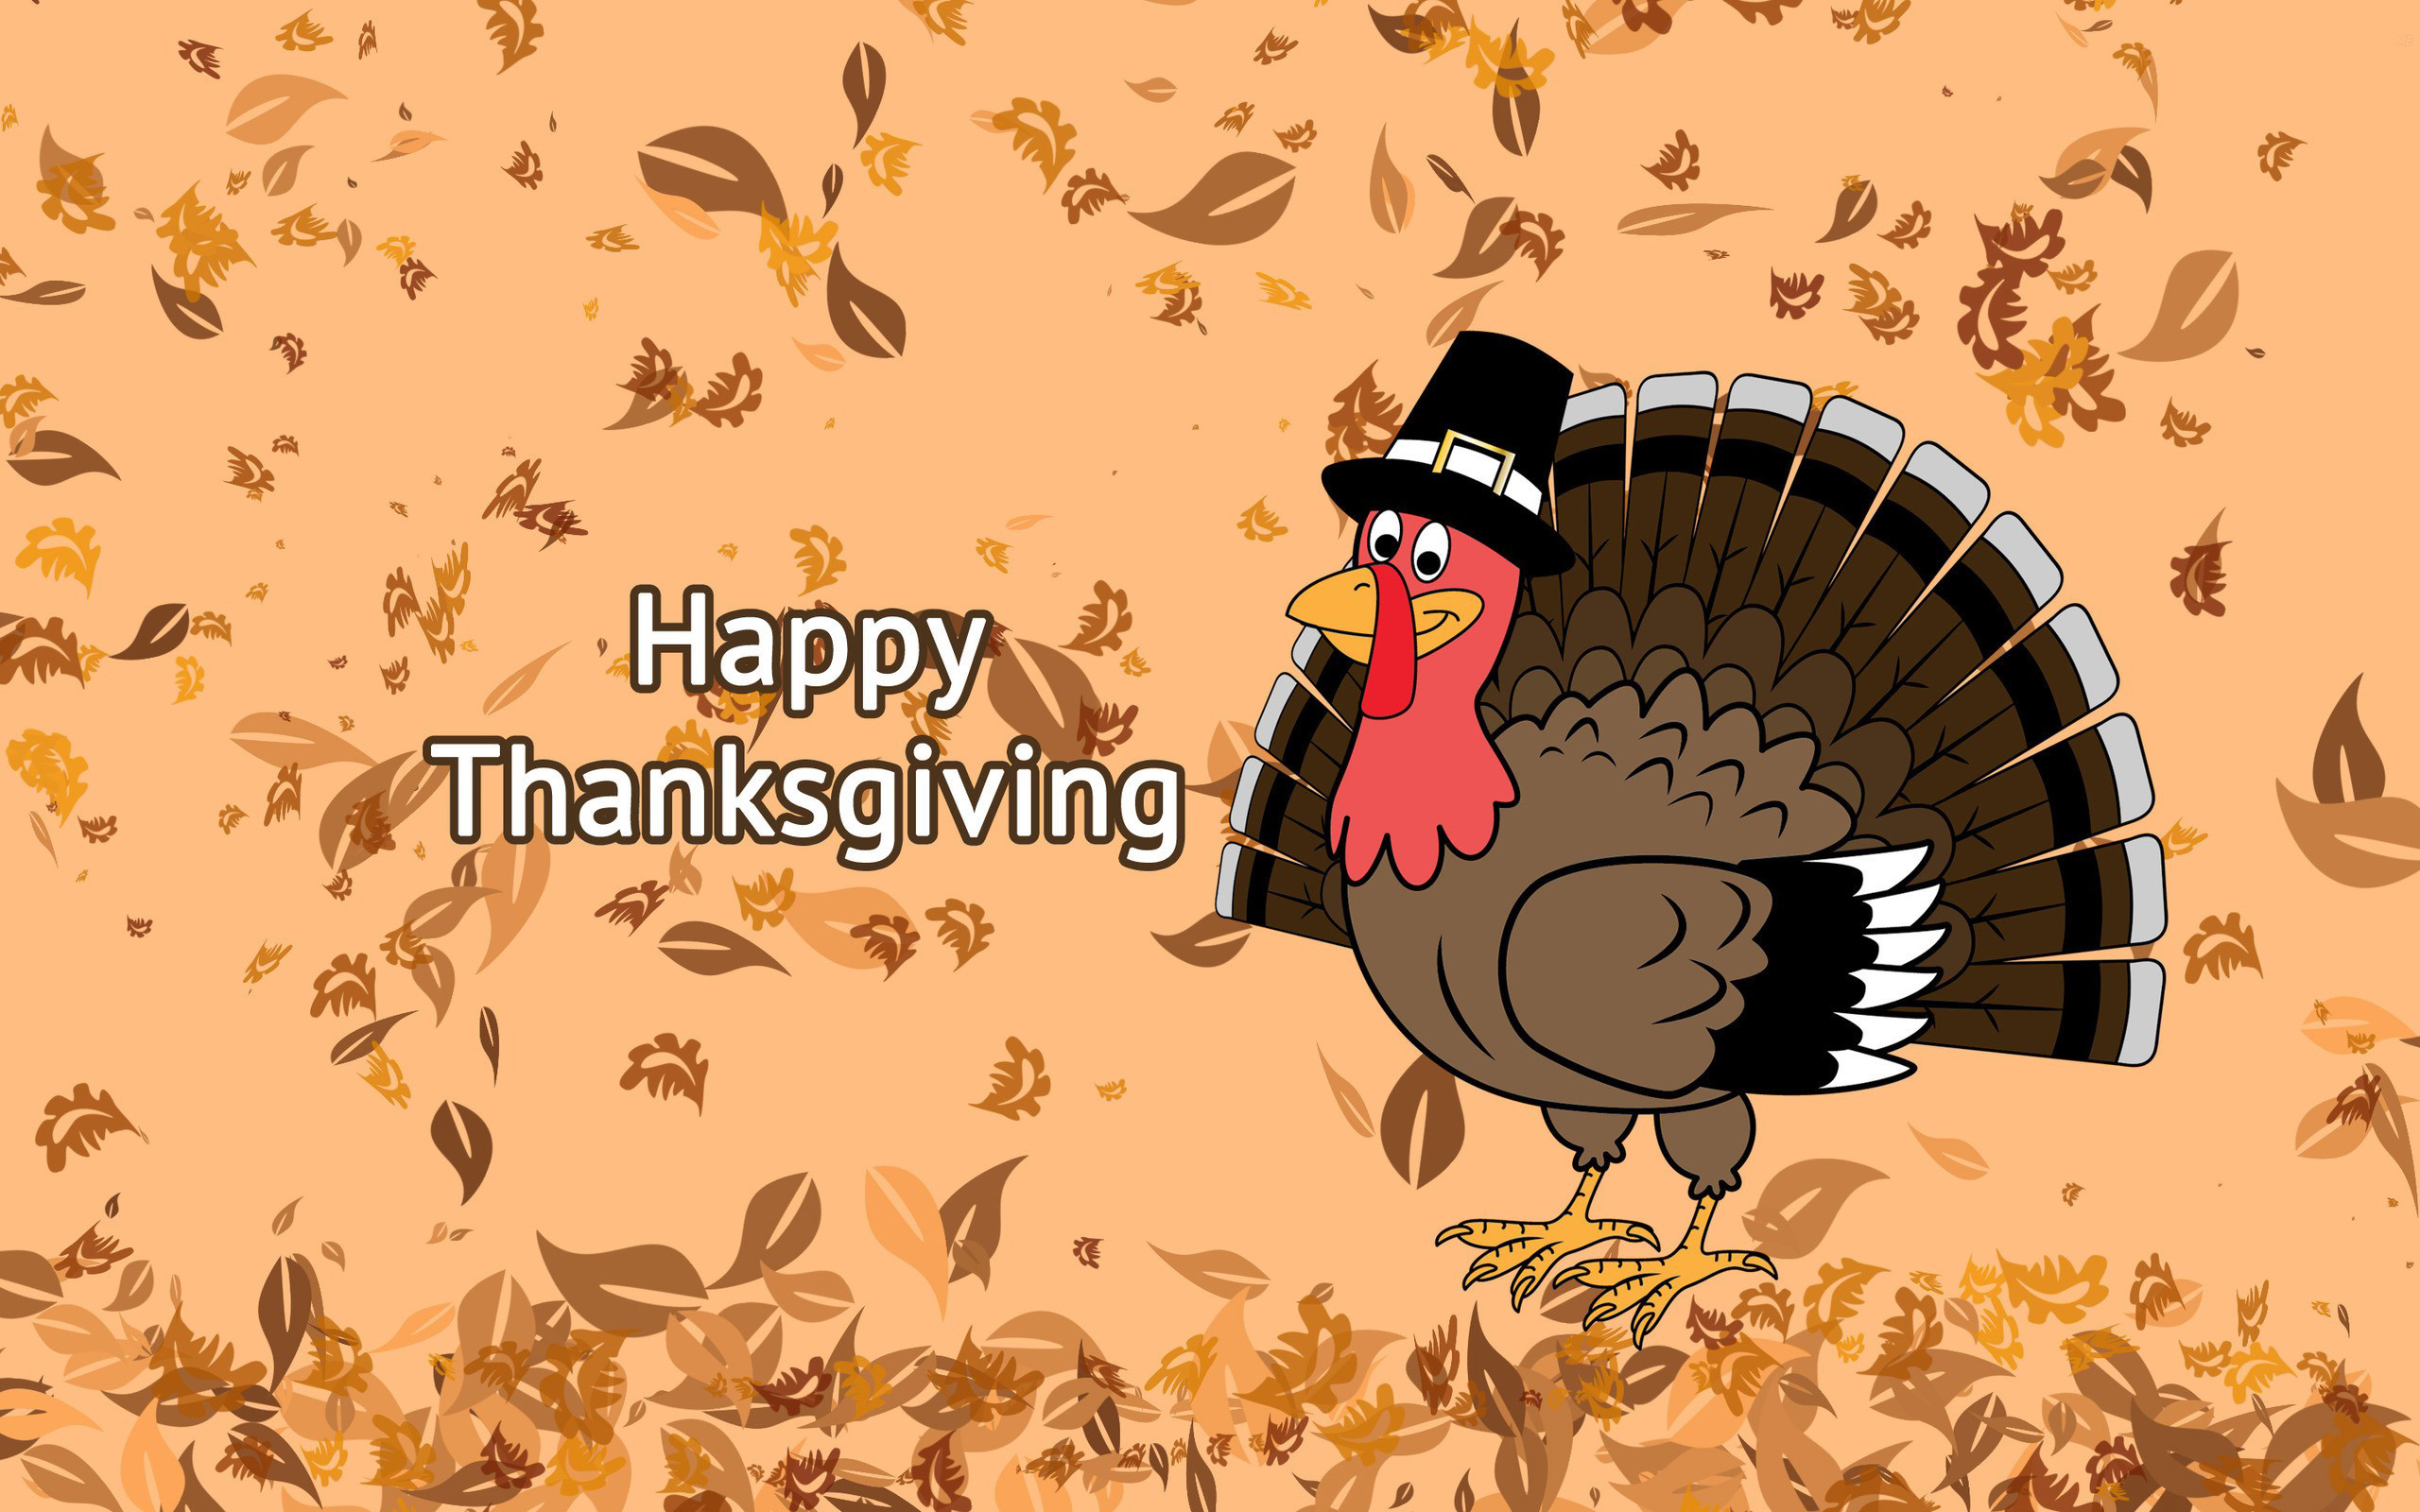 2560x1600 Happy Thanksgiving Day Falling Leaves On Turkey Background Hd Wallpaper